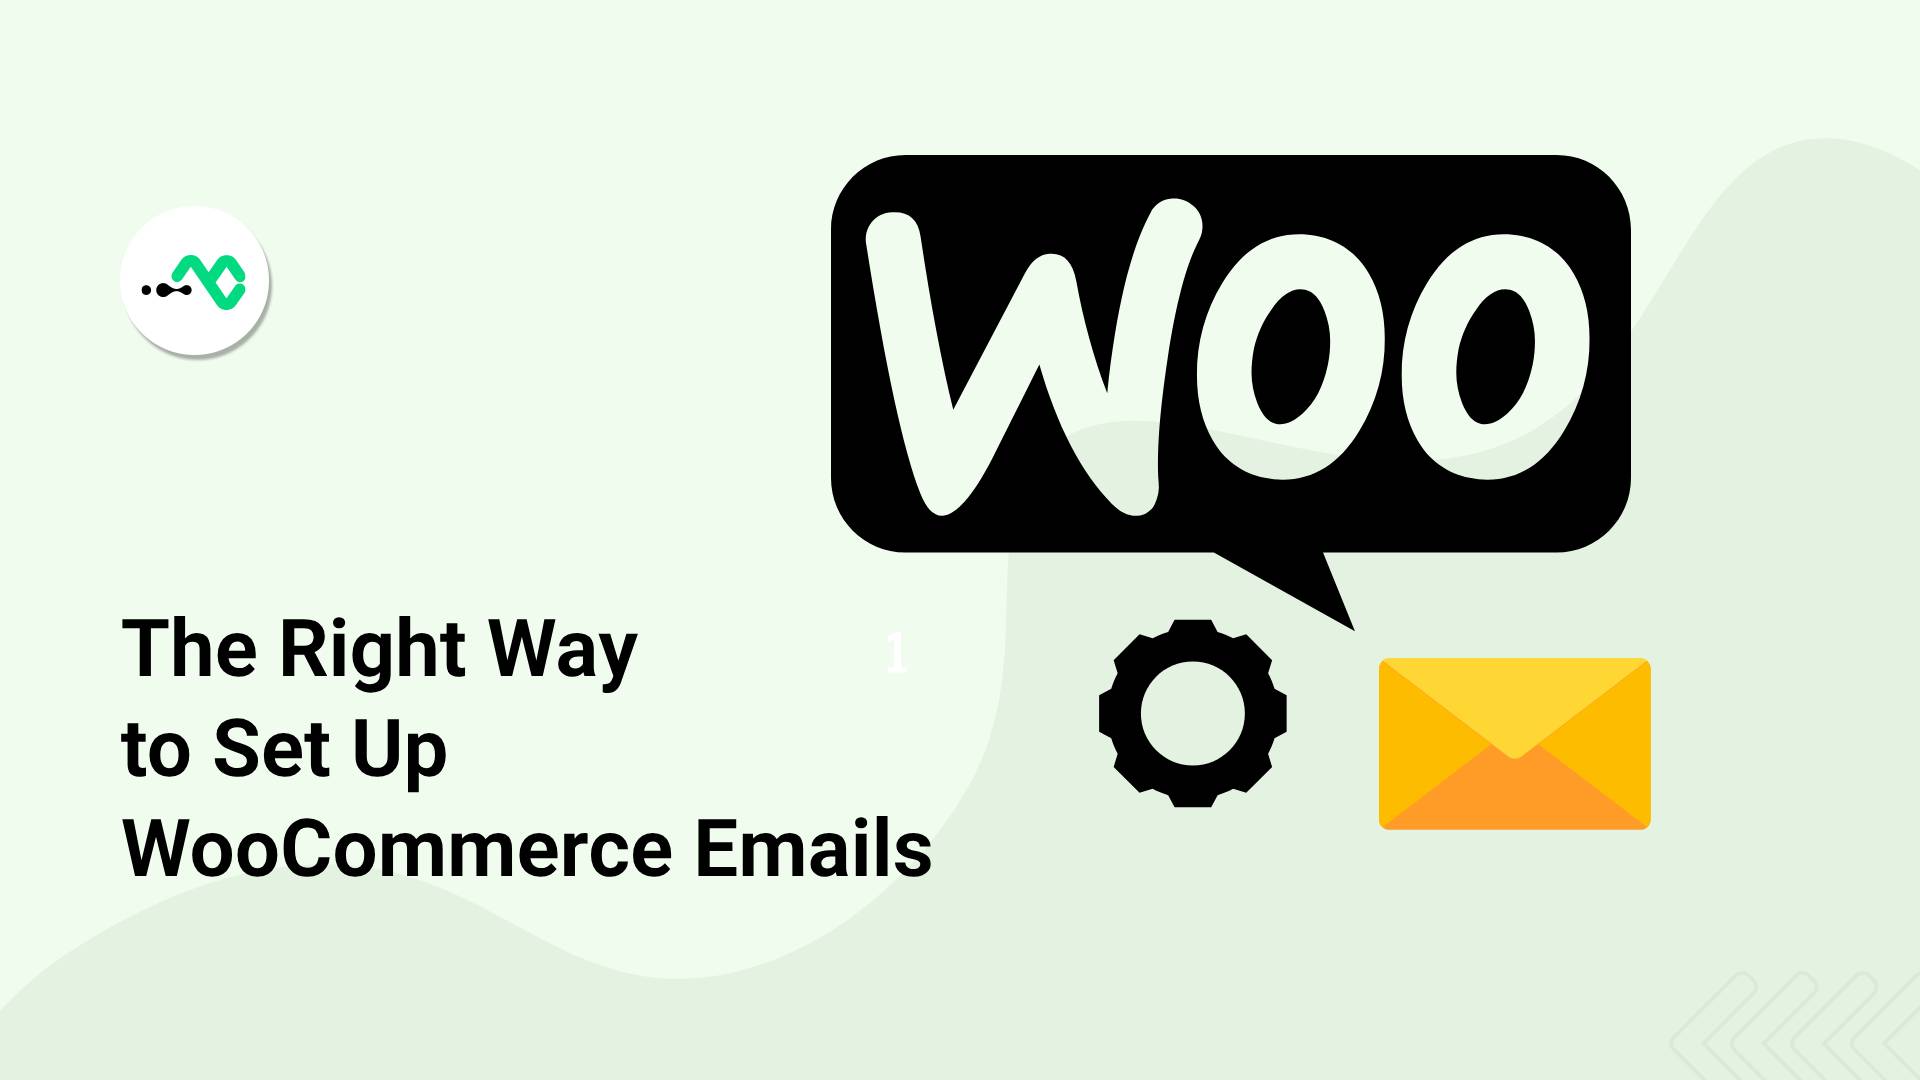 How to Set Up WooCommerce Emails, the Right Way